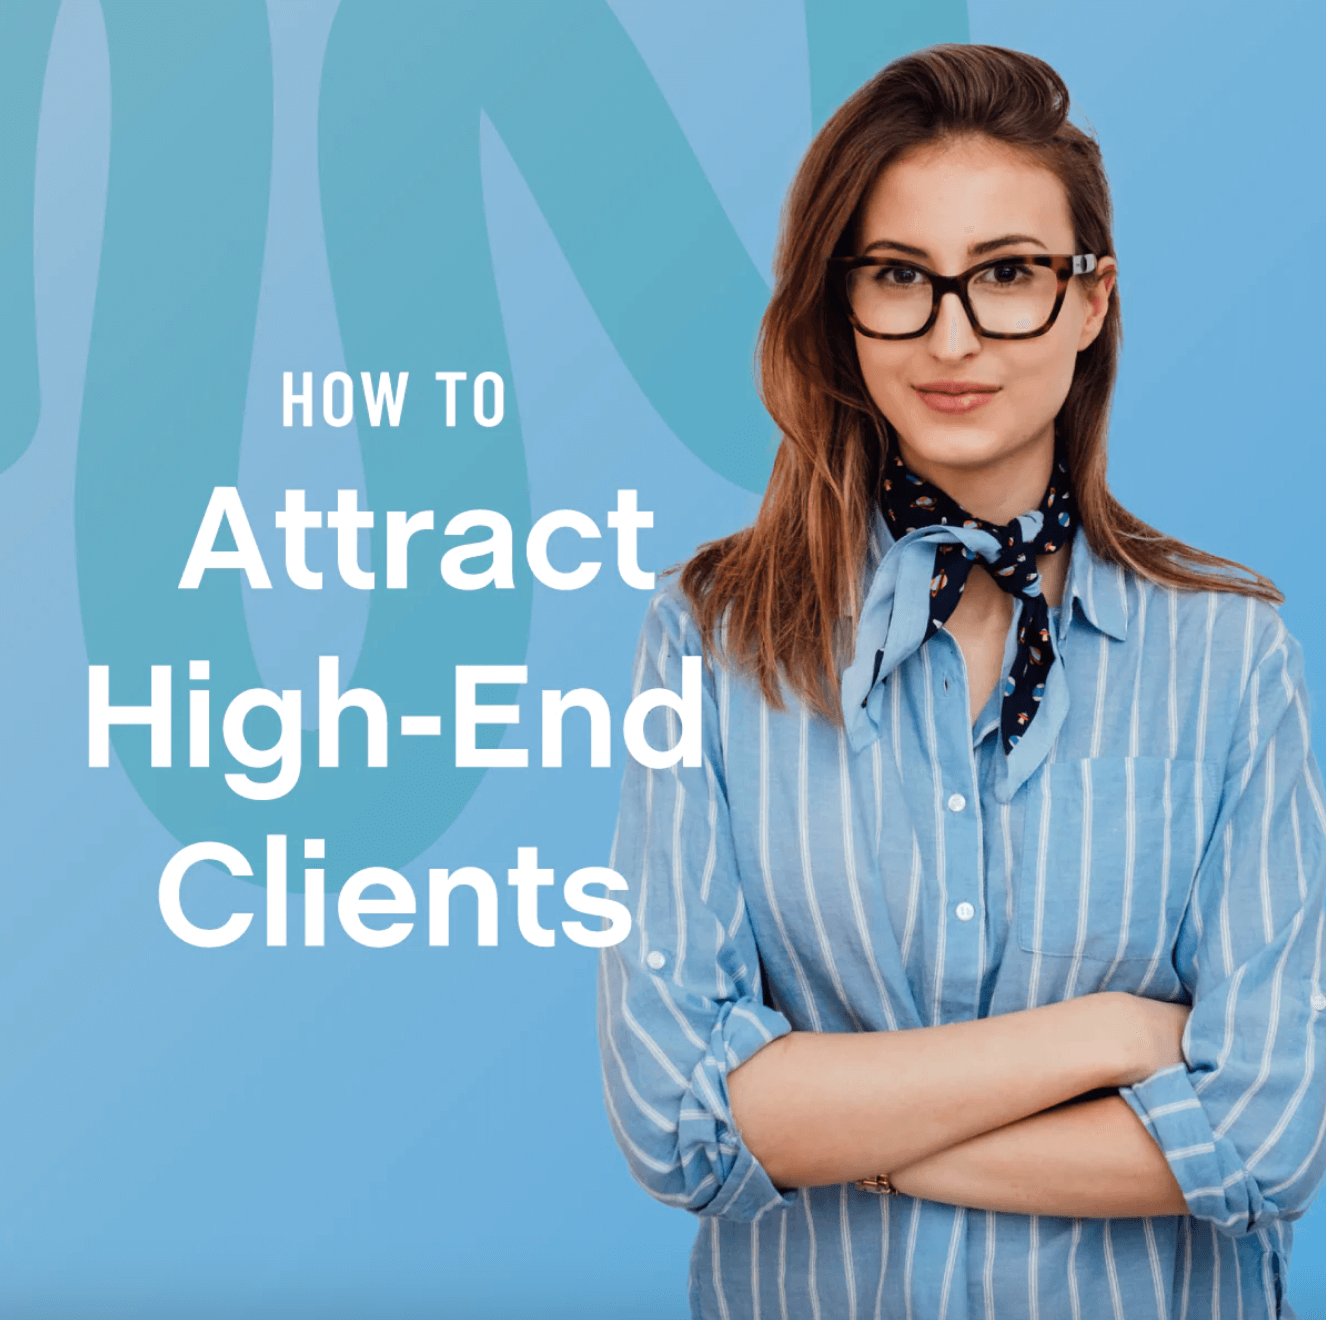 How to Attract High-End Clients